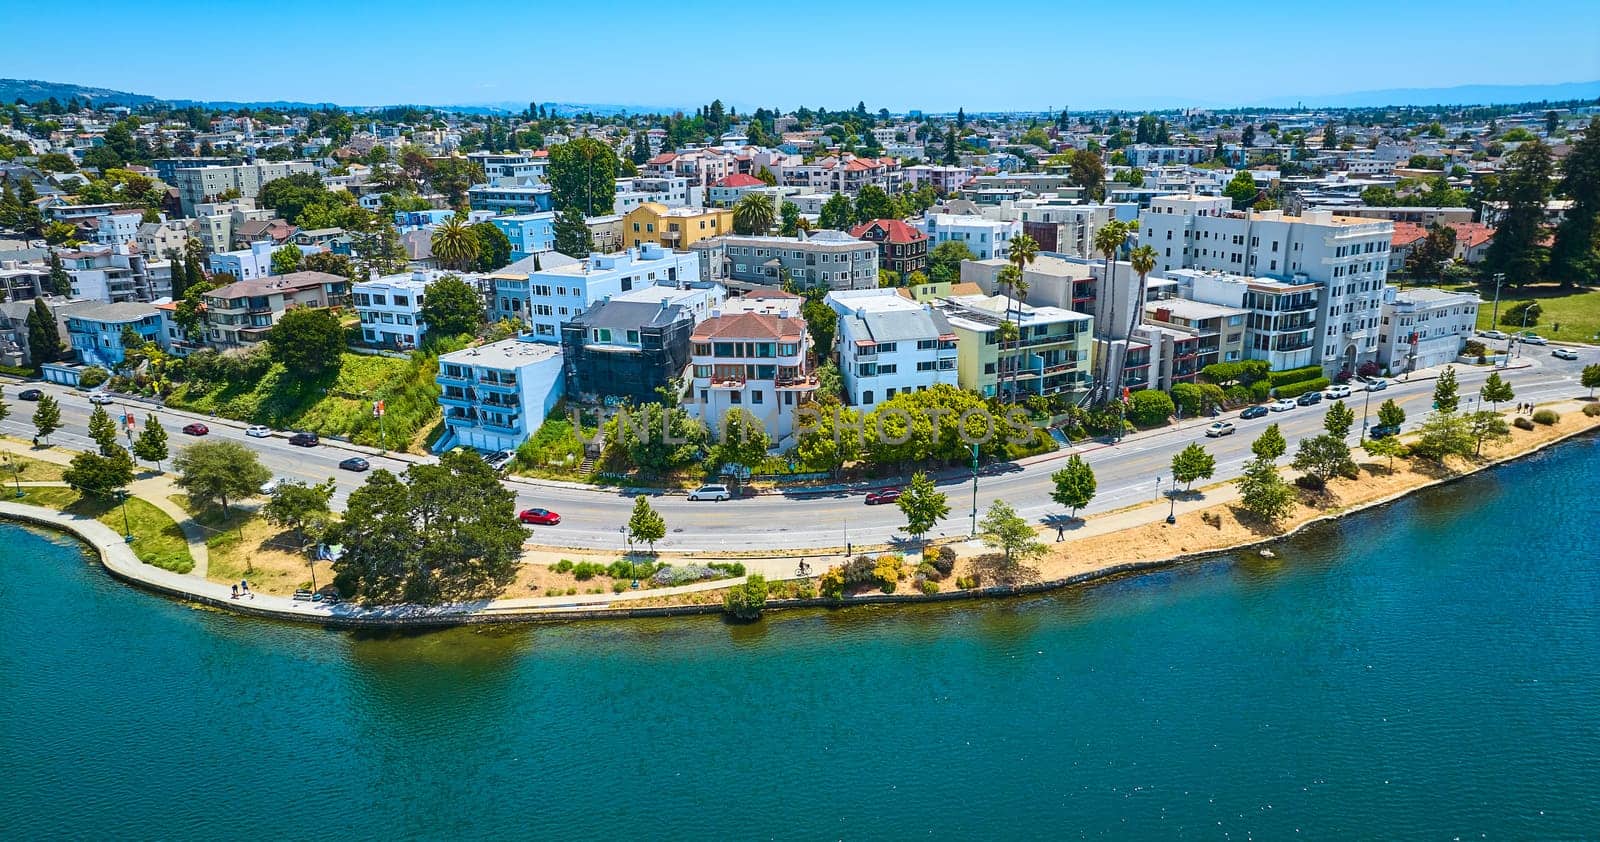 Image of Oakland aerial of residential area with road along lakeshore and blue sky